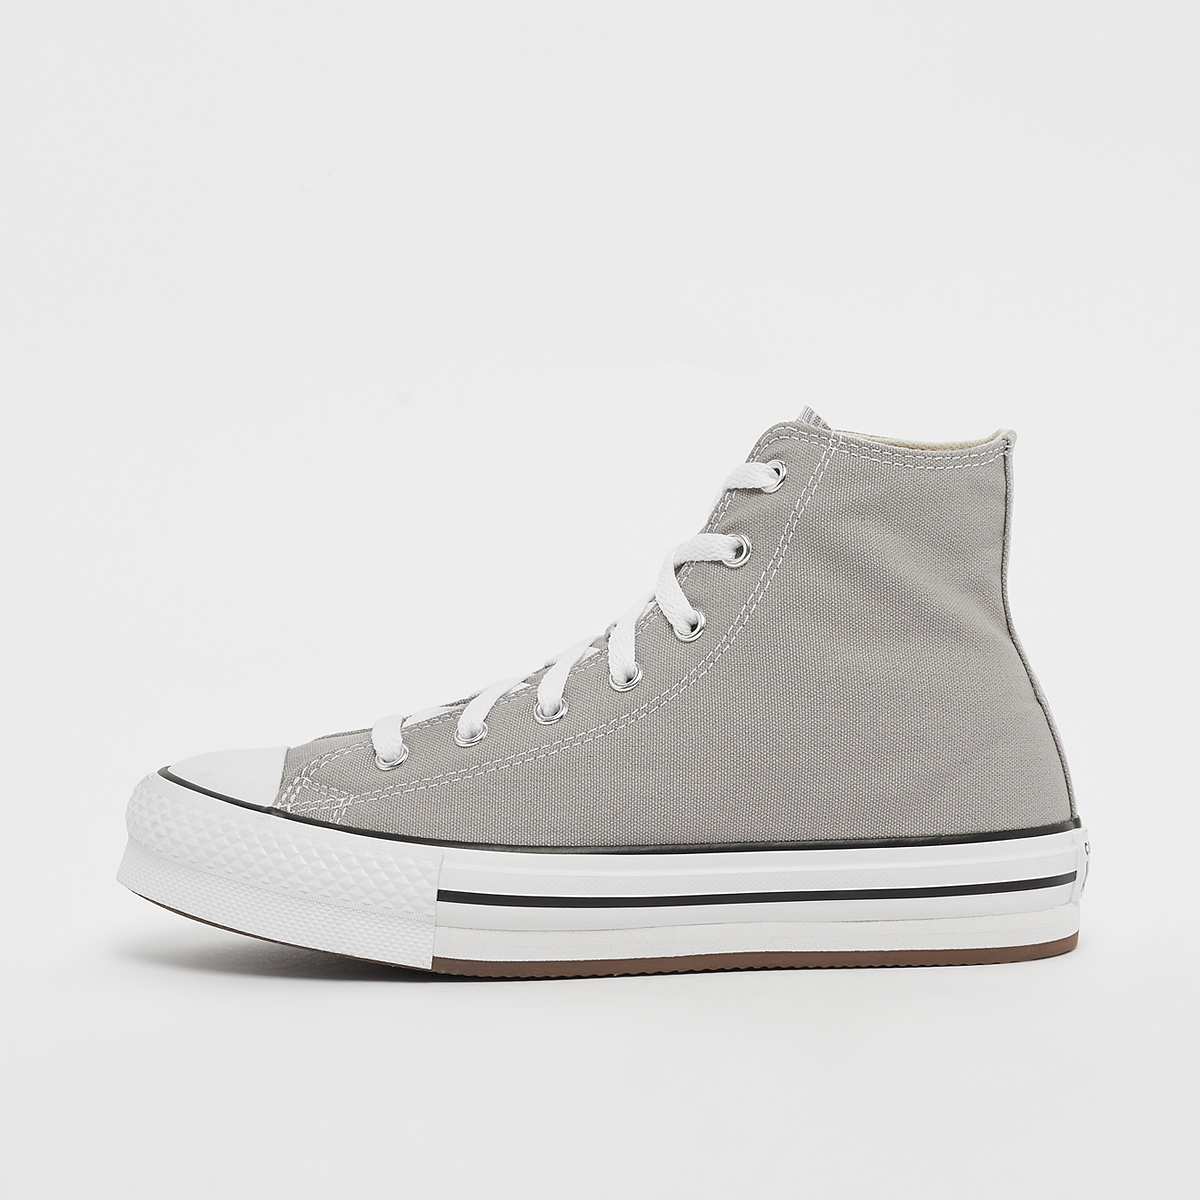 Chuck Taylor All Star Eva Lift totally neutral/white/black, Converse, Footwear, totally neutral/white/black, taille: 36